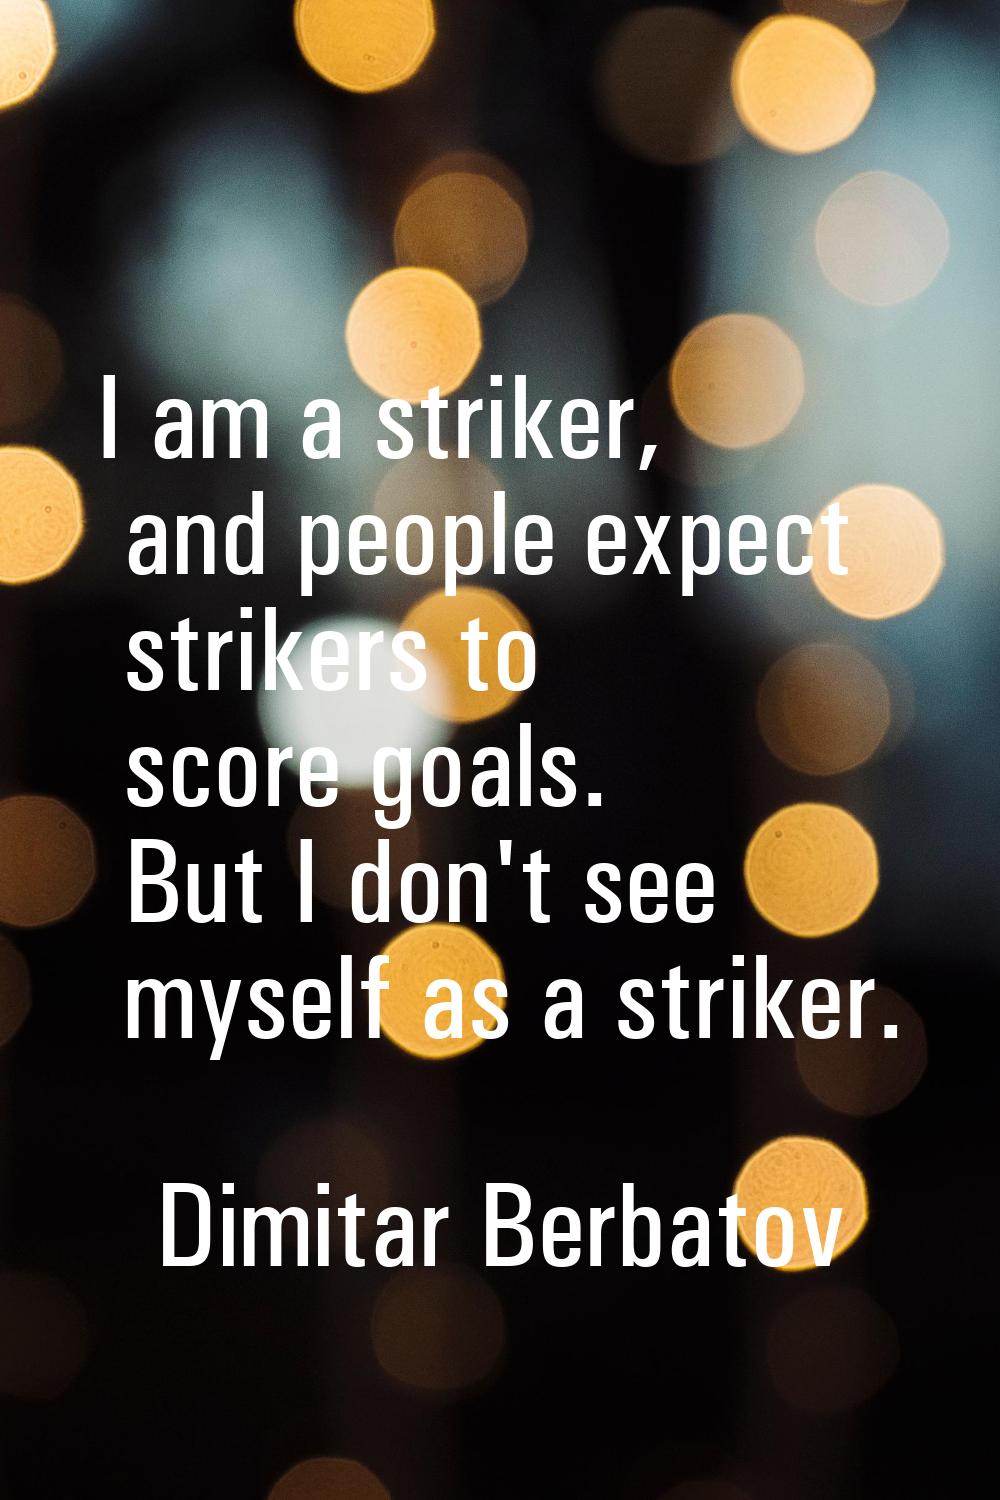 I am a striker, and people expect strikers to score goals. But I don't see myself as a striker.